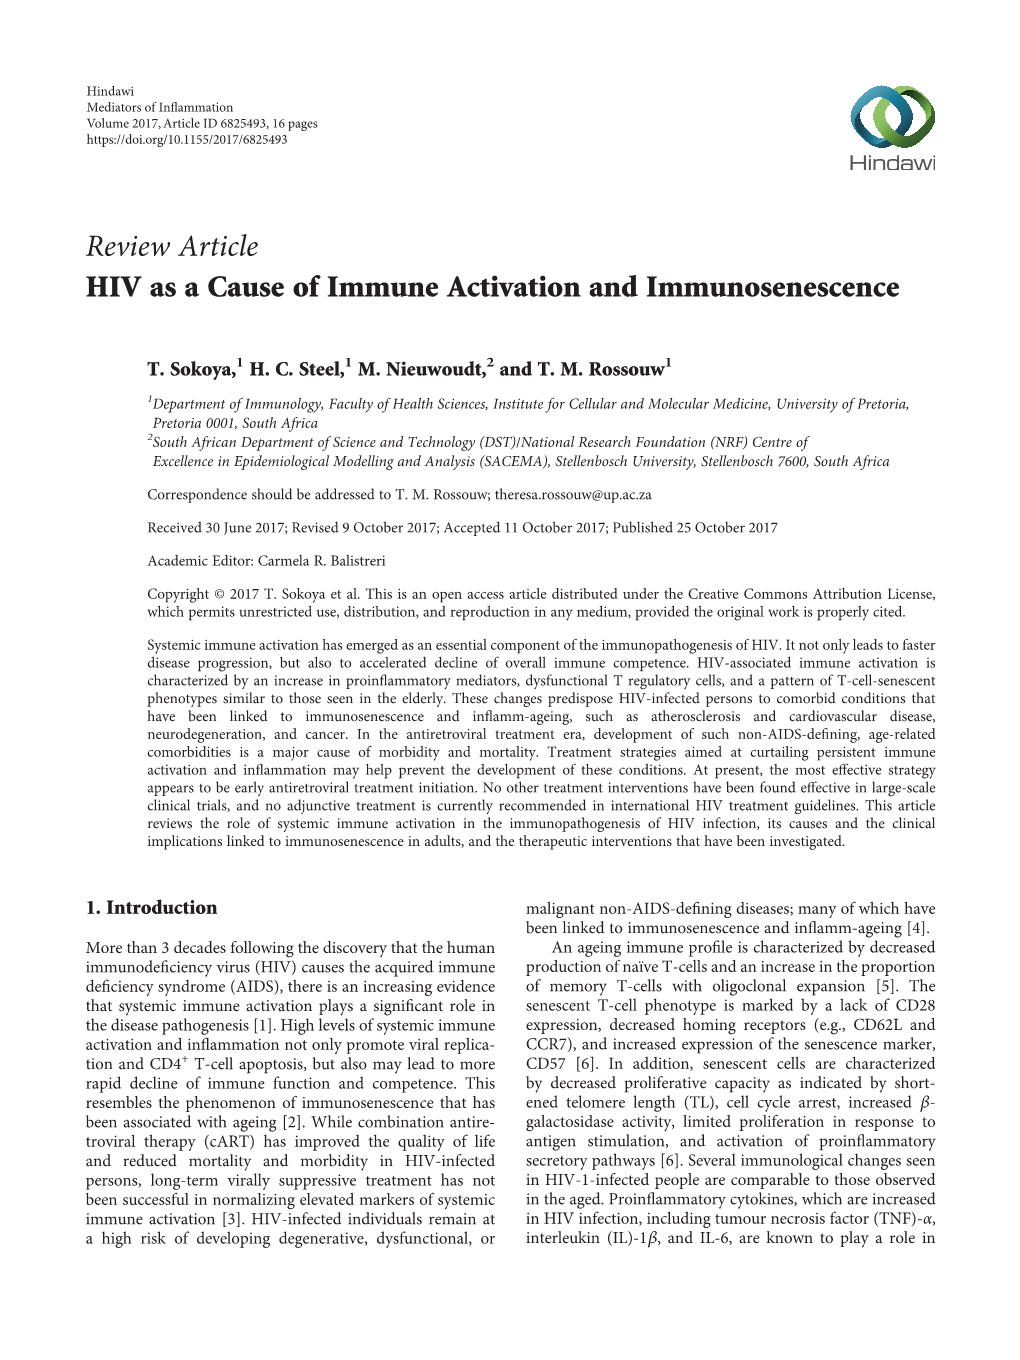 Review Article HIV As a Cause of Immune Activation and Immunosenescence